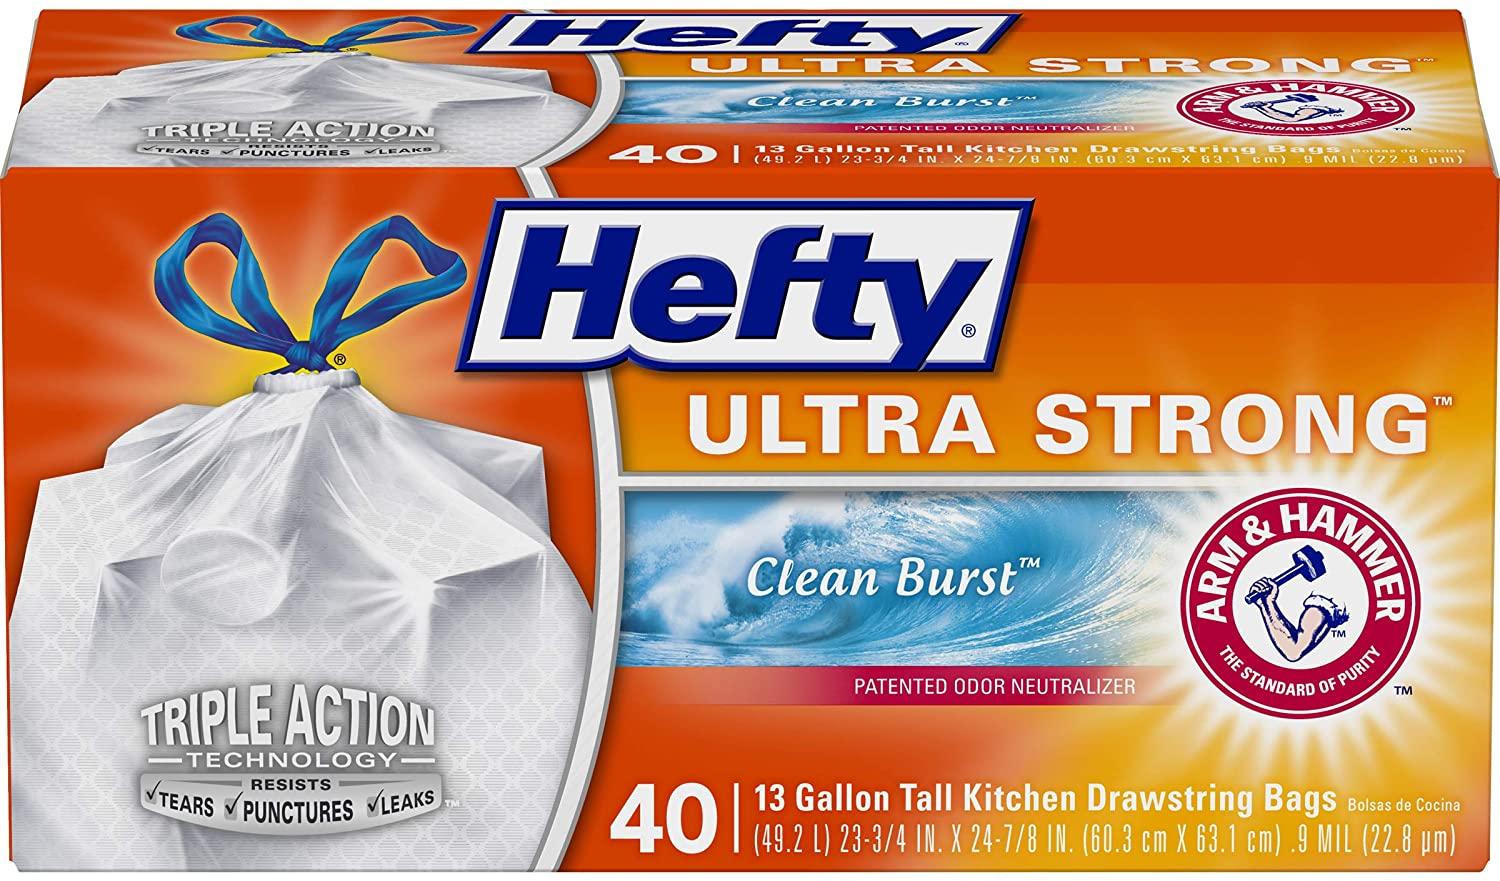 40 Hefty Ultra Strong 13-Gallon Trash Bags for $4.99 Shipped